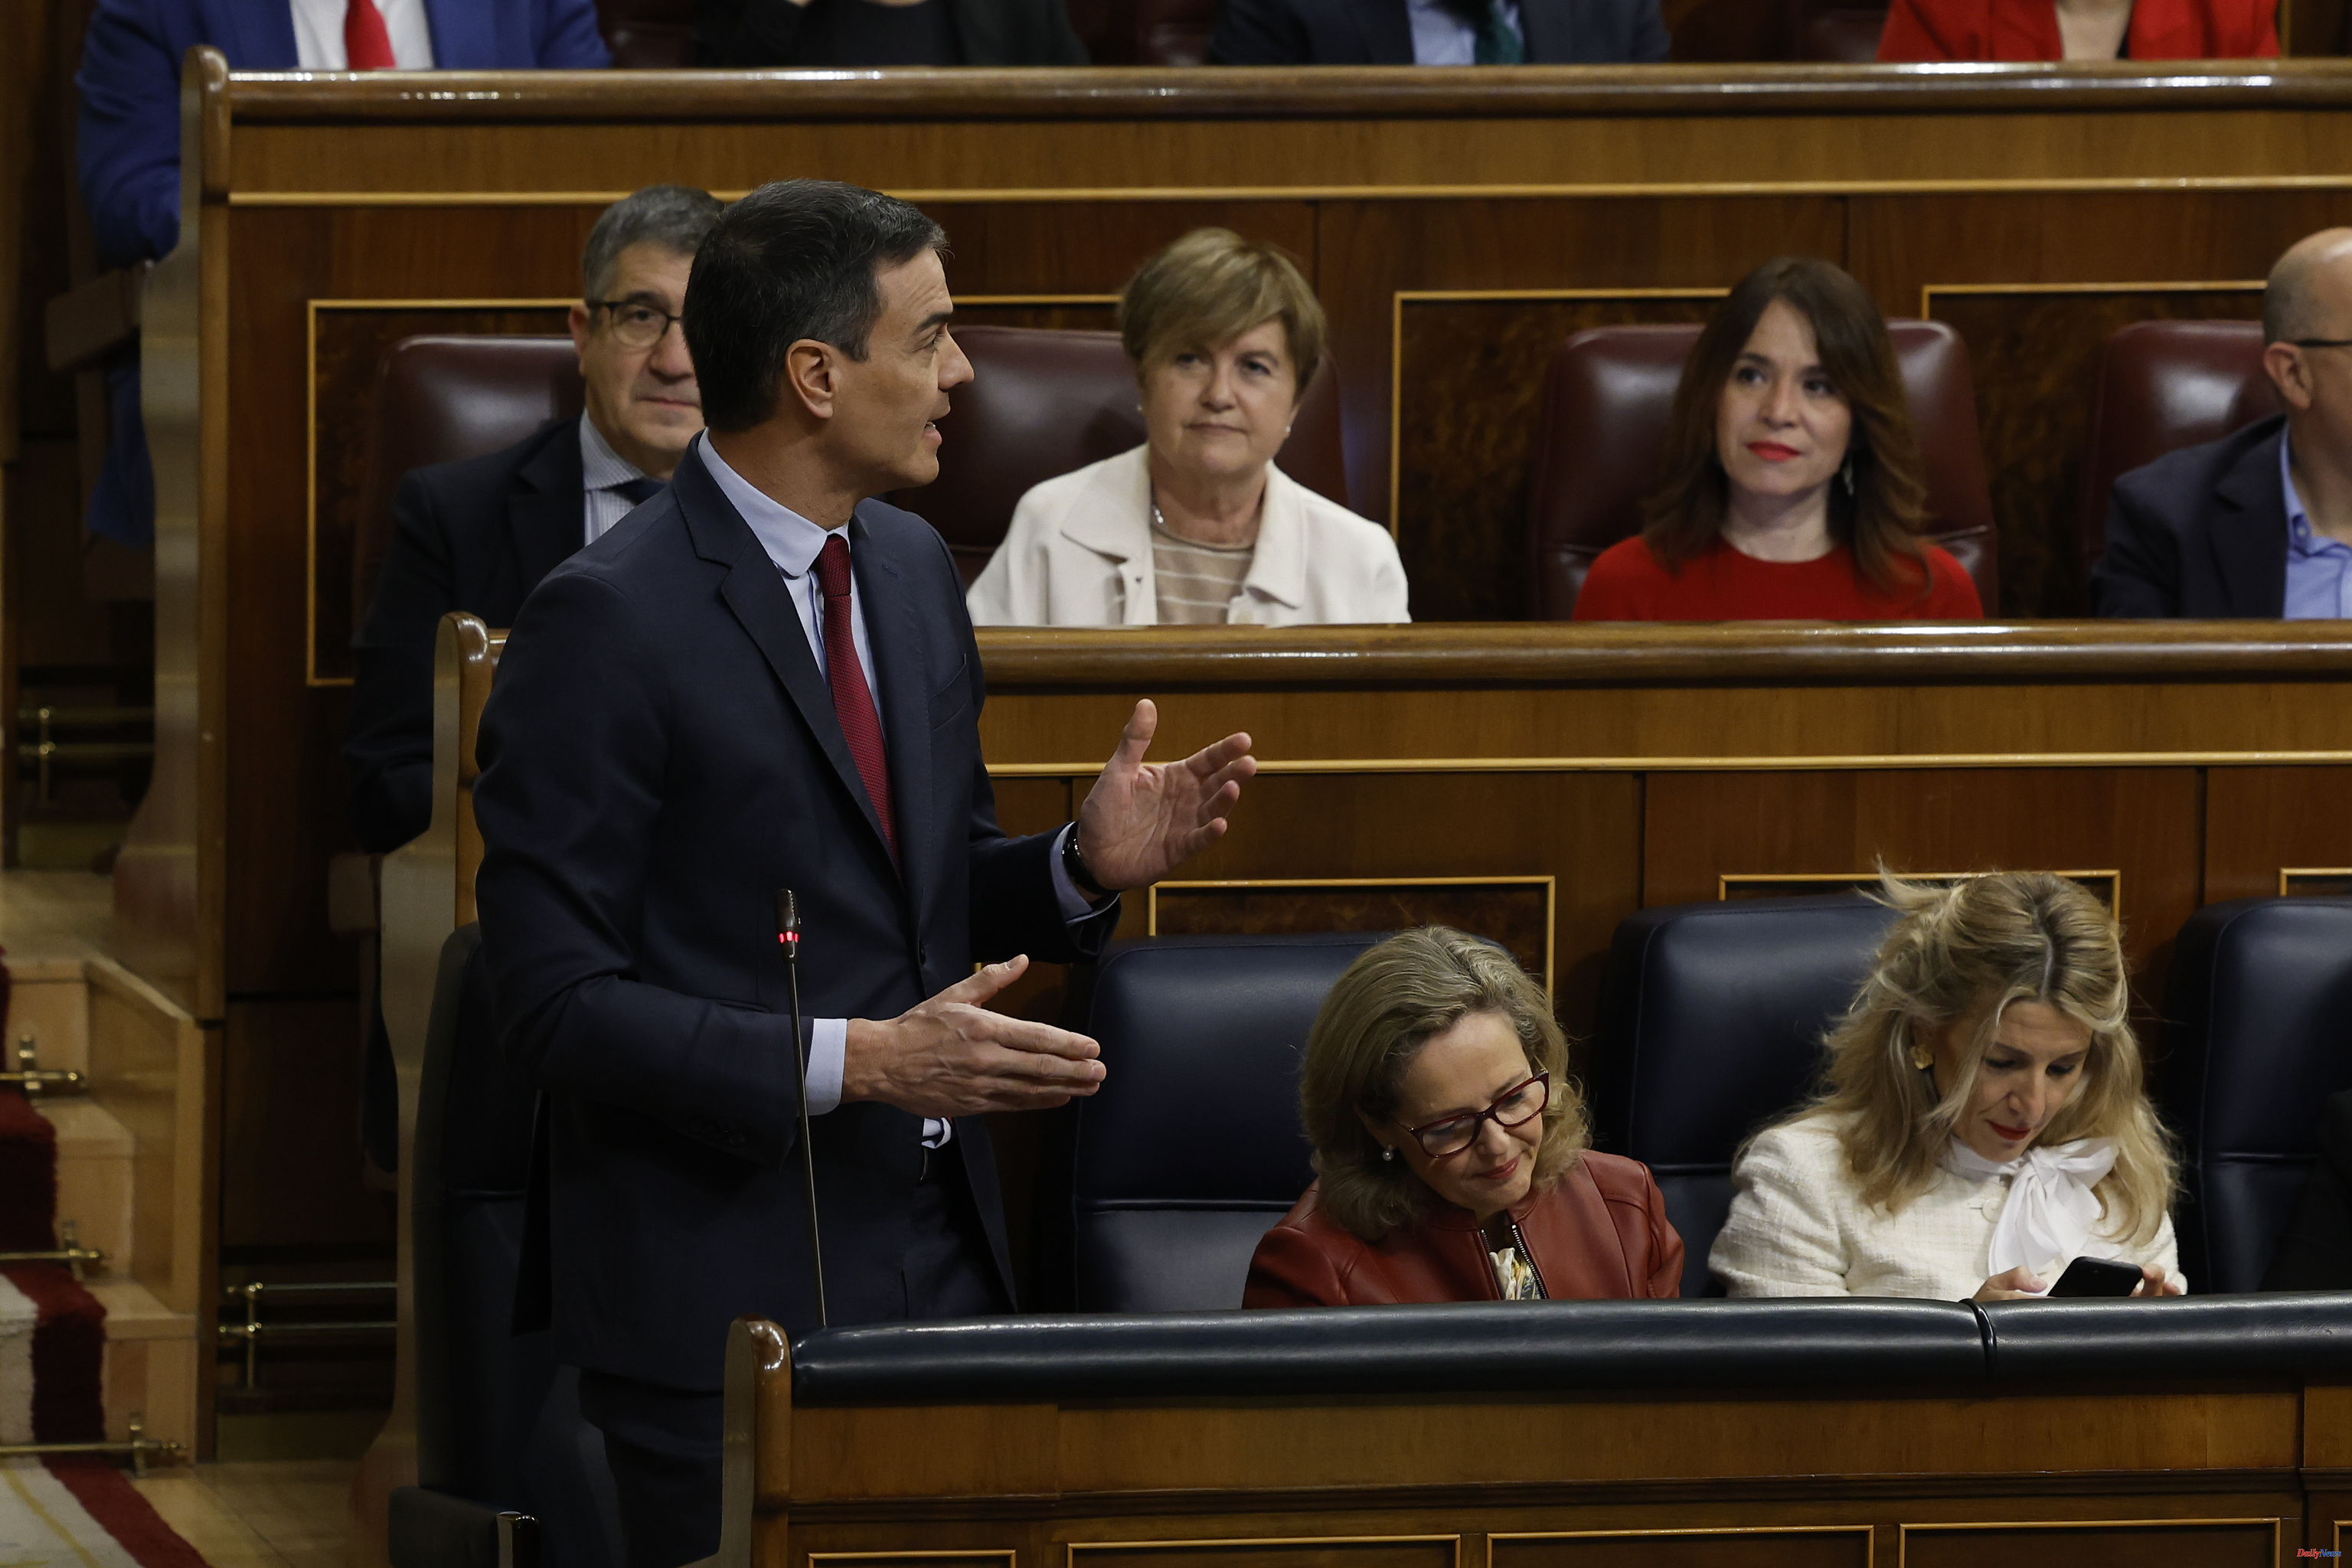 Control session The PP reaches out to Sánchez to discuss the "rectification" of the 'only yes is yes' next week